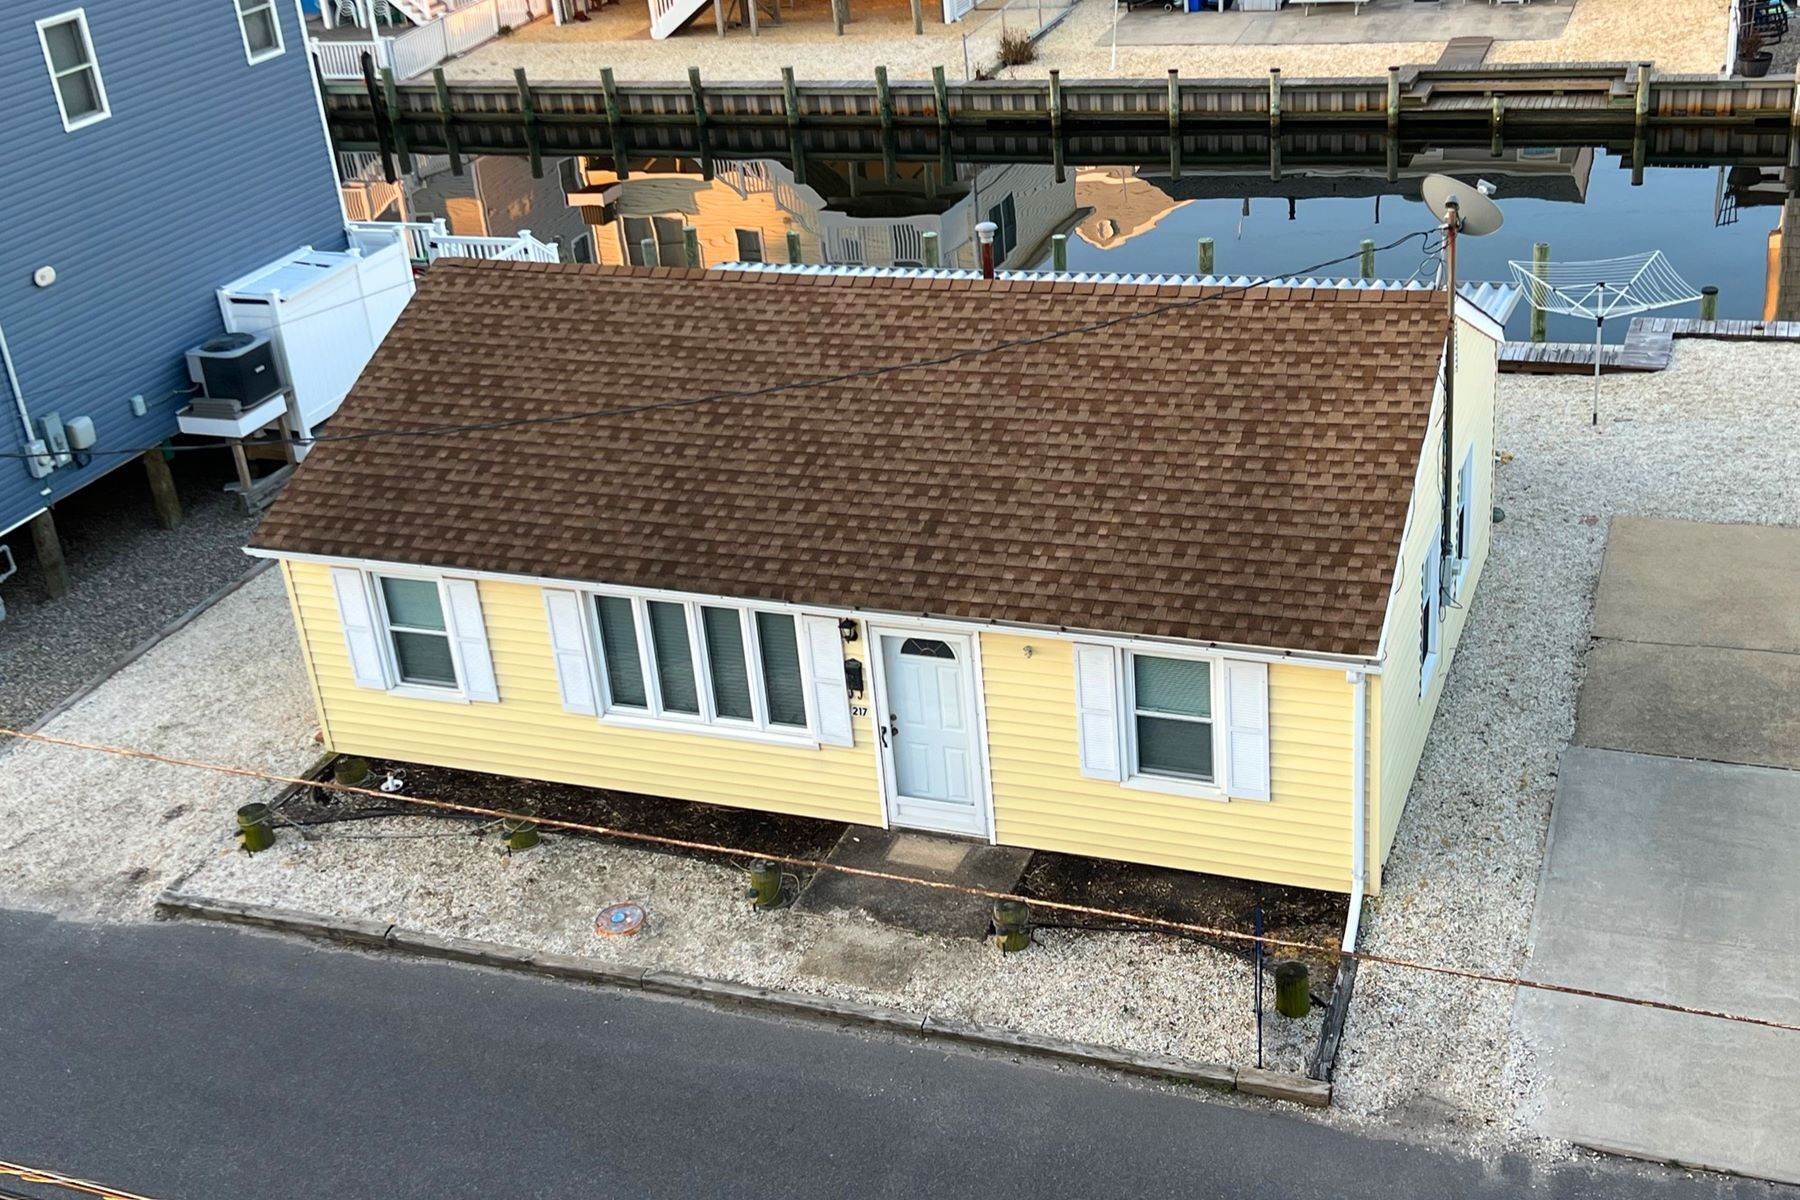 Property for Sale at Waterfront Opportunity in Desirable Sunset Manor 217 Kathryn Street Lavallette, New Jersey 08735 United States